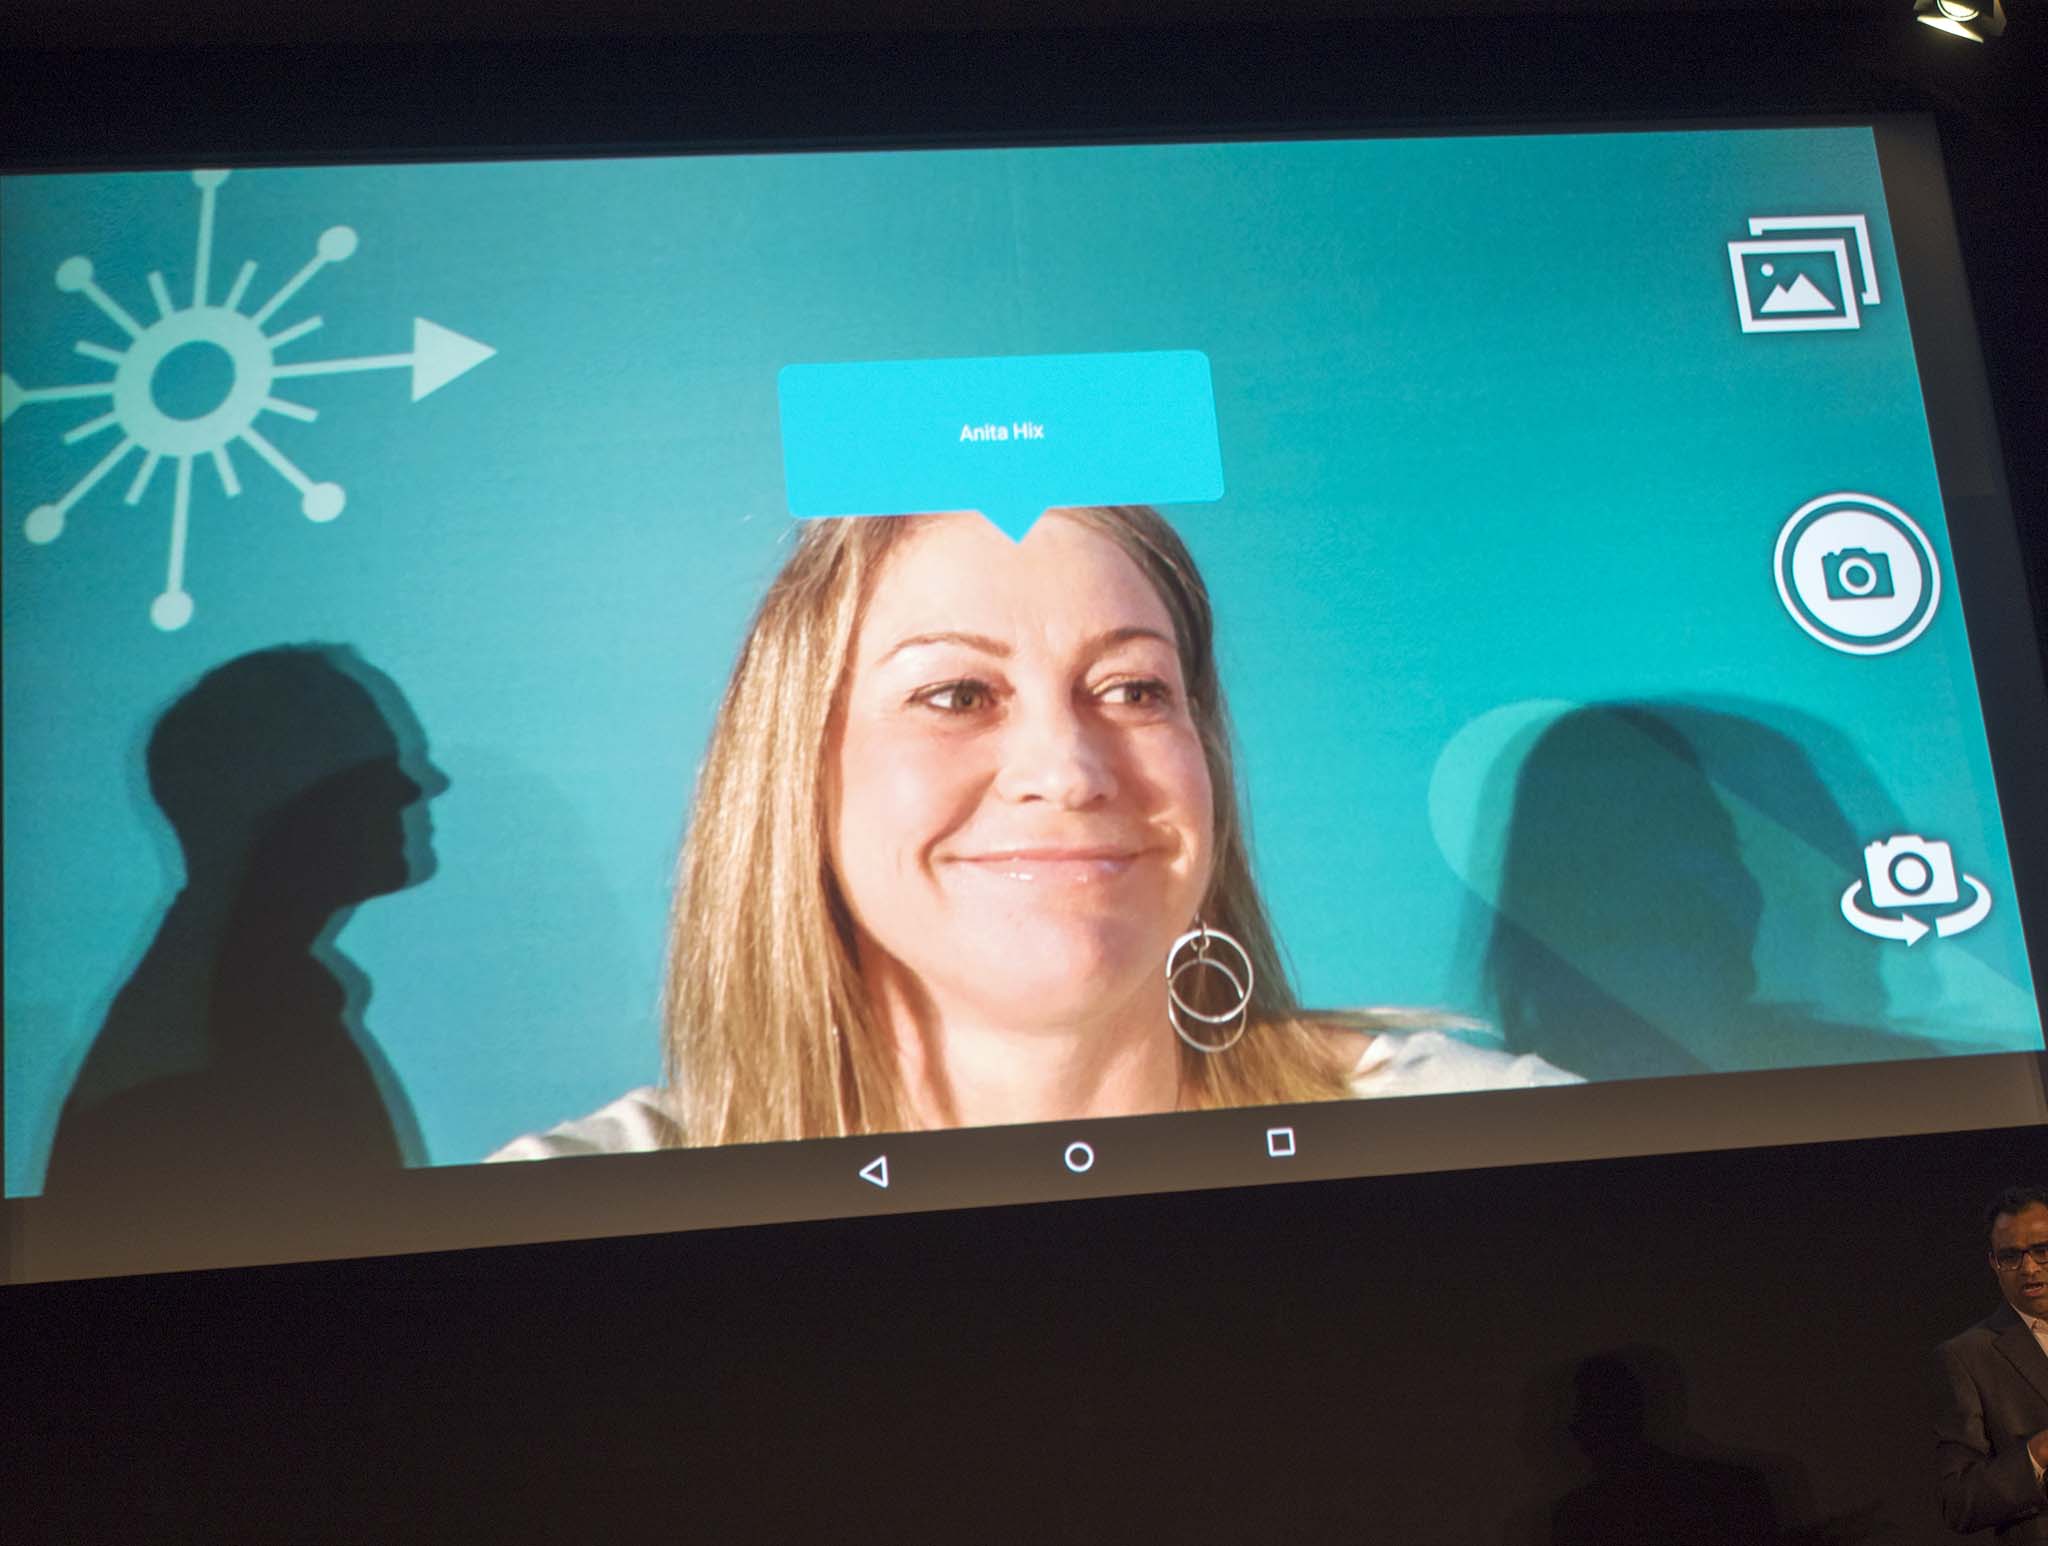 Qualcomm Zeroth face recognition